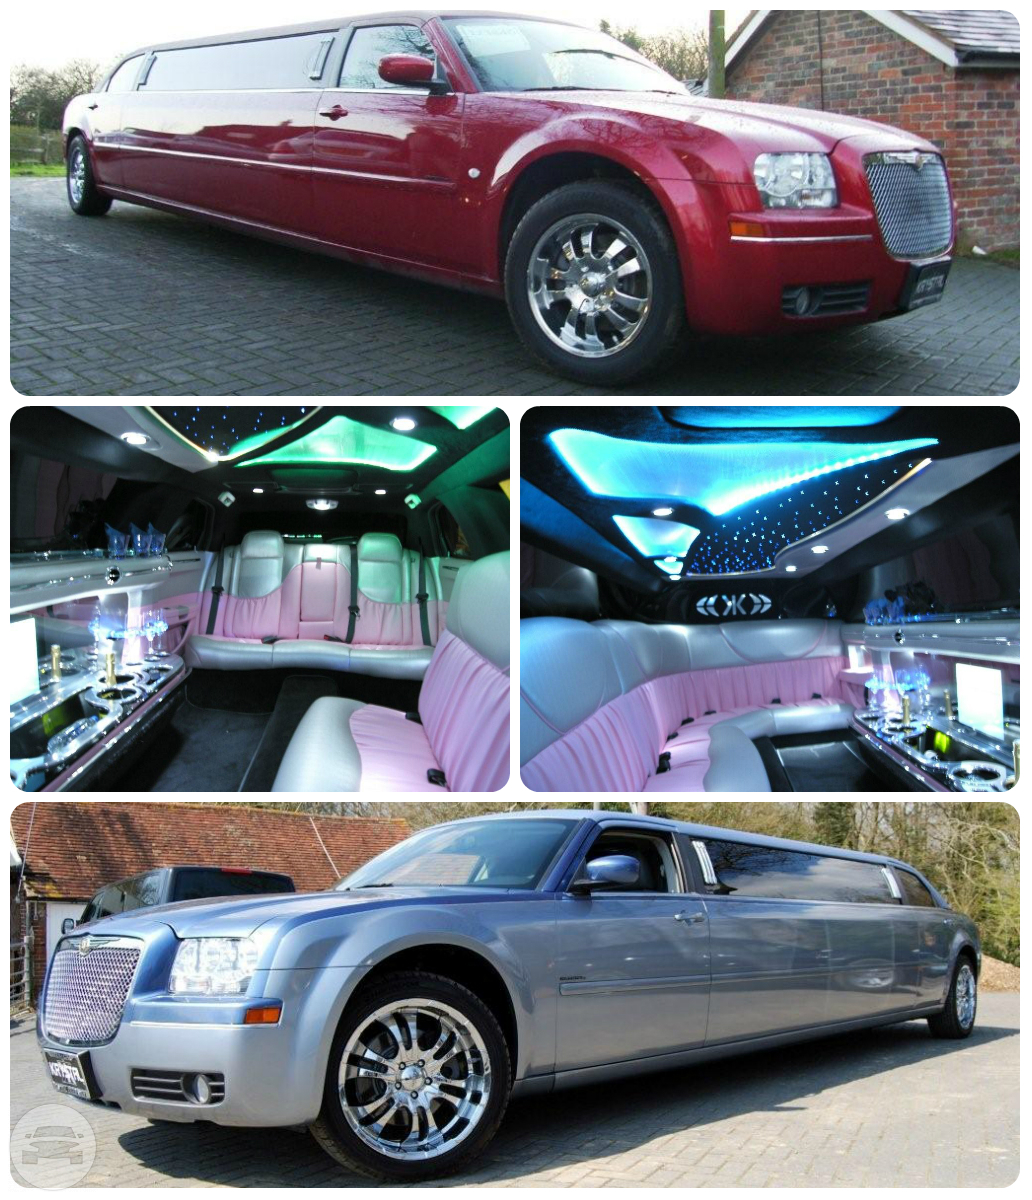 Red Chrysler300c Limos
Limo /
London, UK

 / Hourly £0.00
